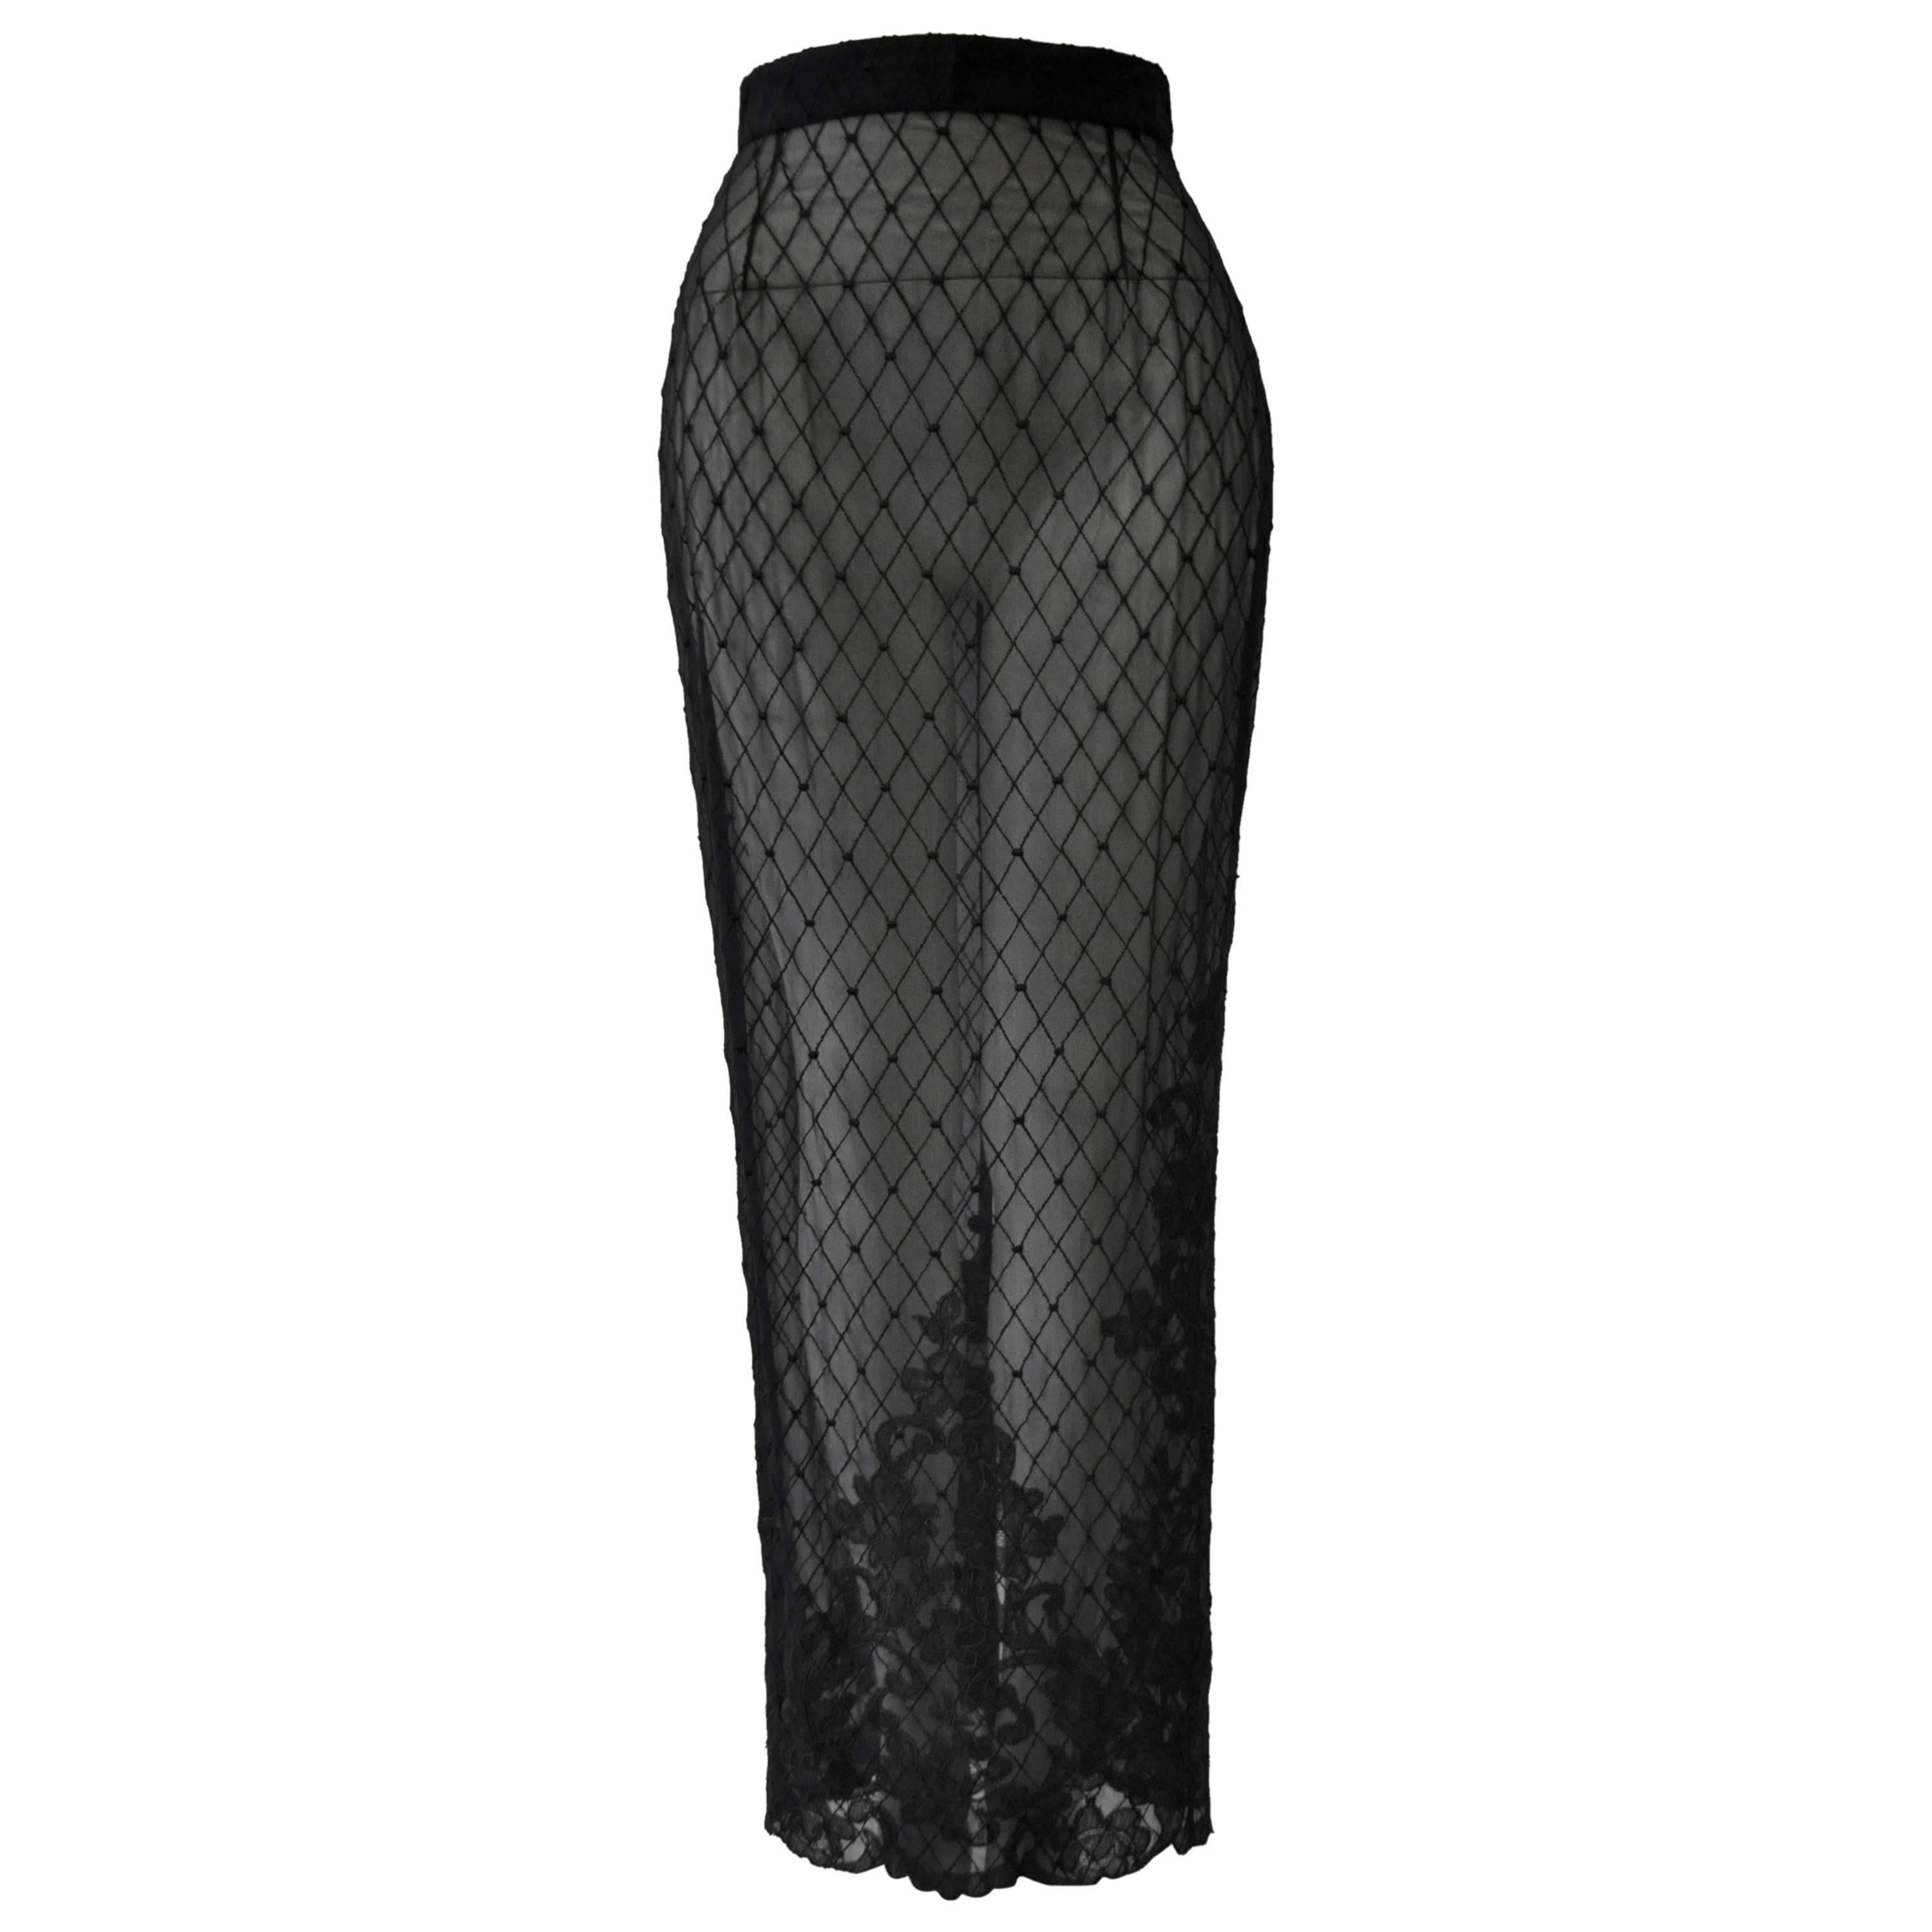 Sensational Gianni Versace Couture Netted Silk Floral Lace Hem Maxi Skirt For Sale